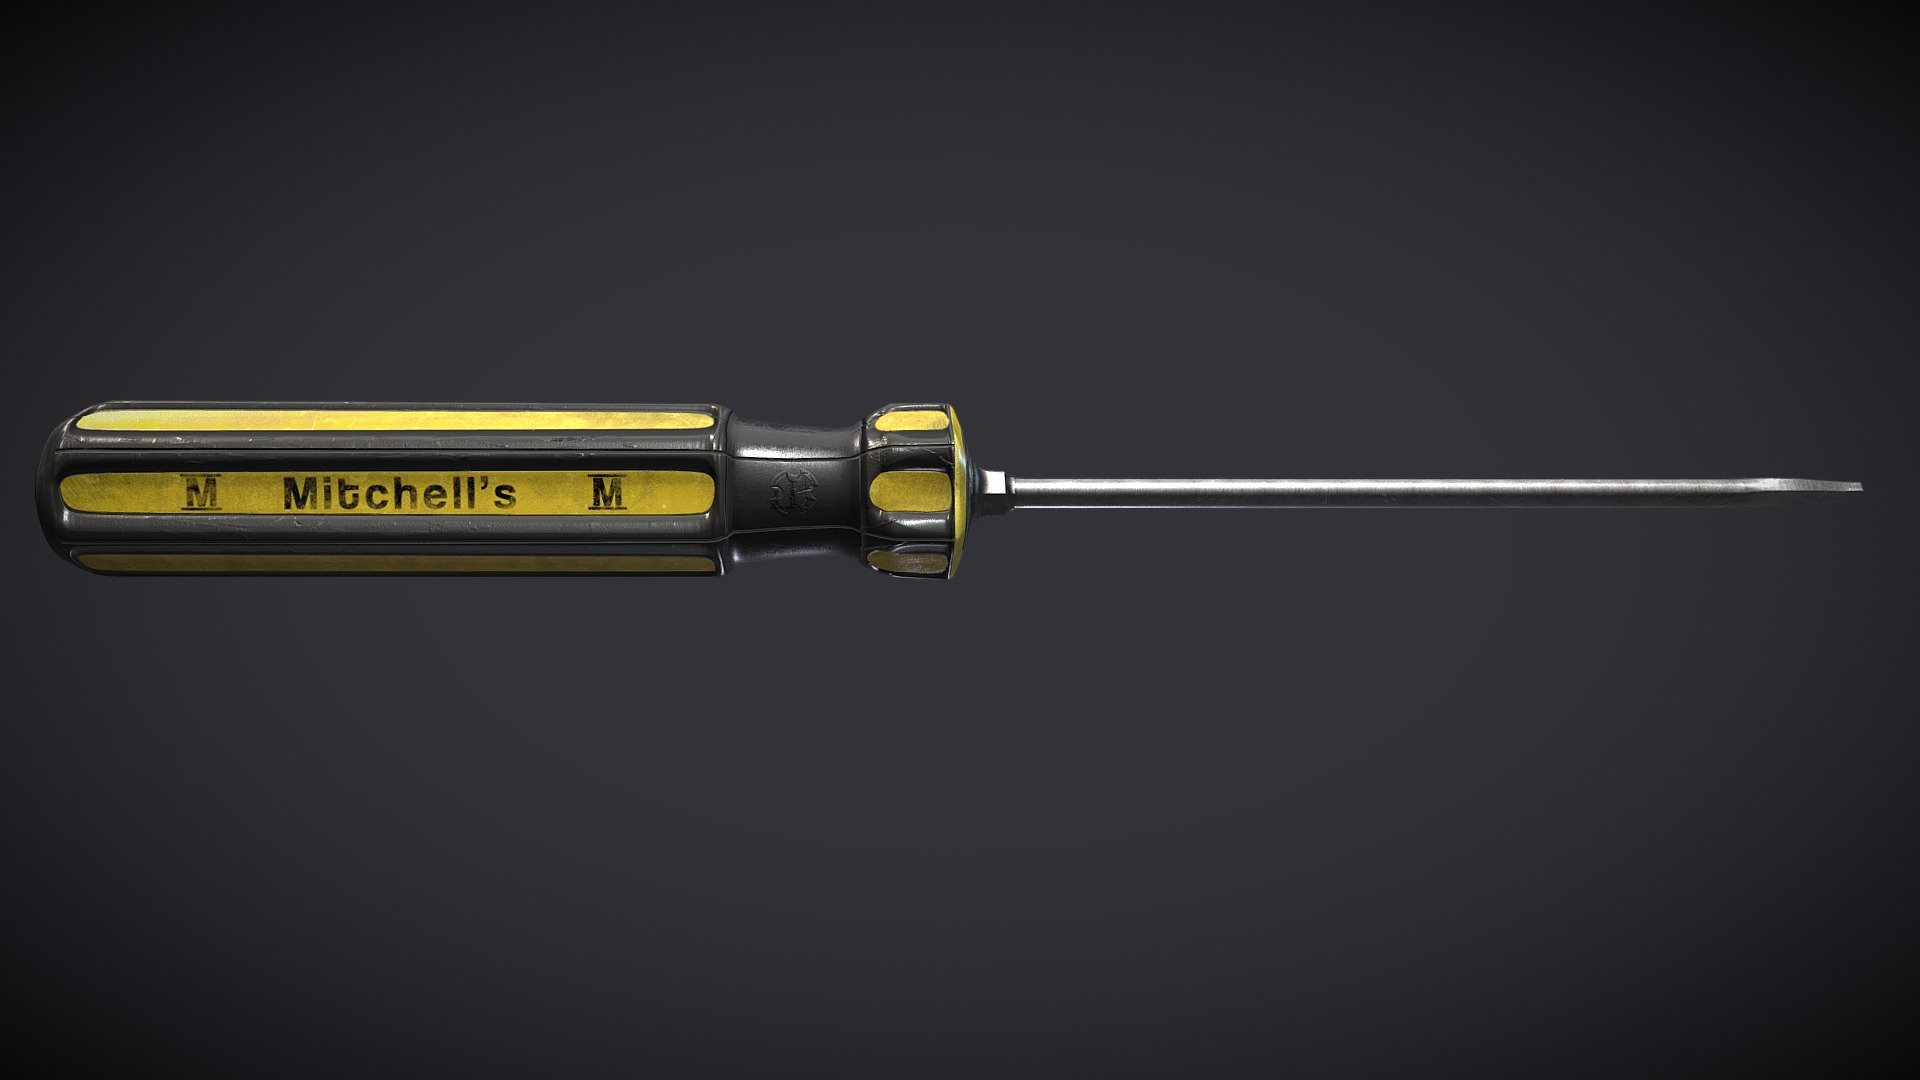 Hy everybody! 
This time I'm showing you a screwdriver prop done for a school project, hope you enjoy it!

Modeling done in 3ds Max, baked and textured in Substance Painter.

Critiques and suggestions are welcome! - Screwdriver Game Asset - 3D model by Stefano Manente (@Laeron_) 3d model